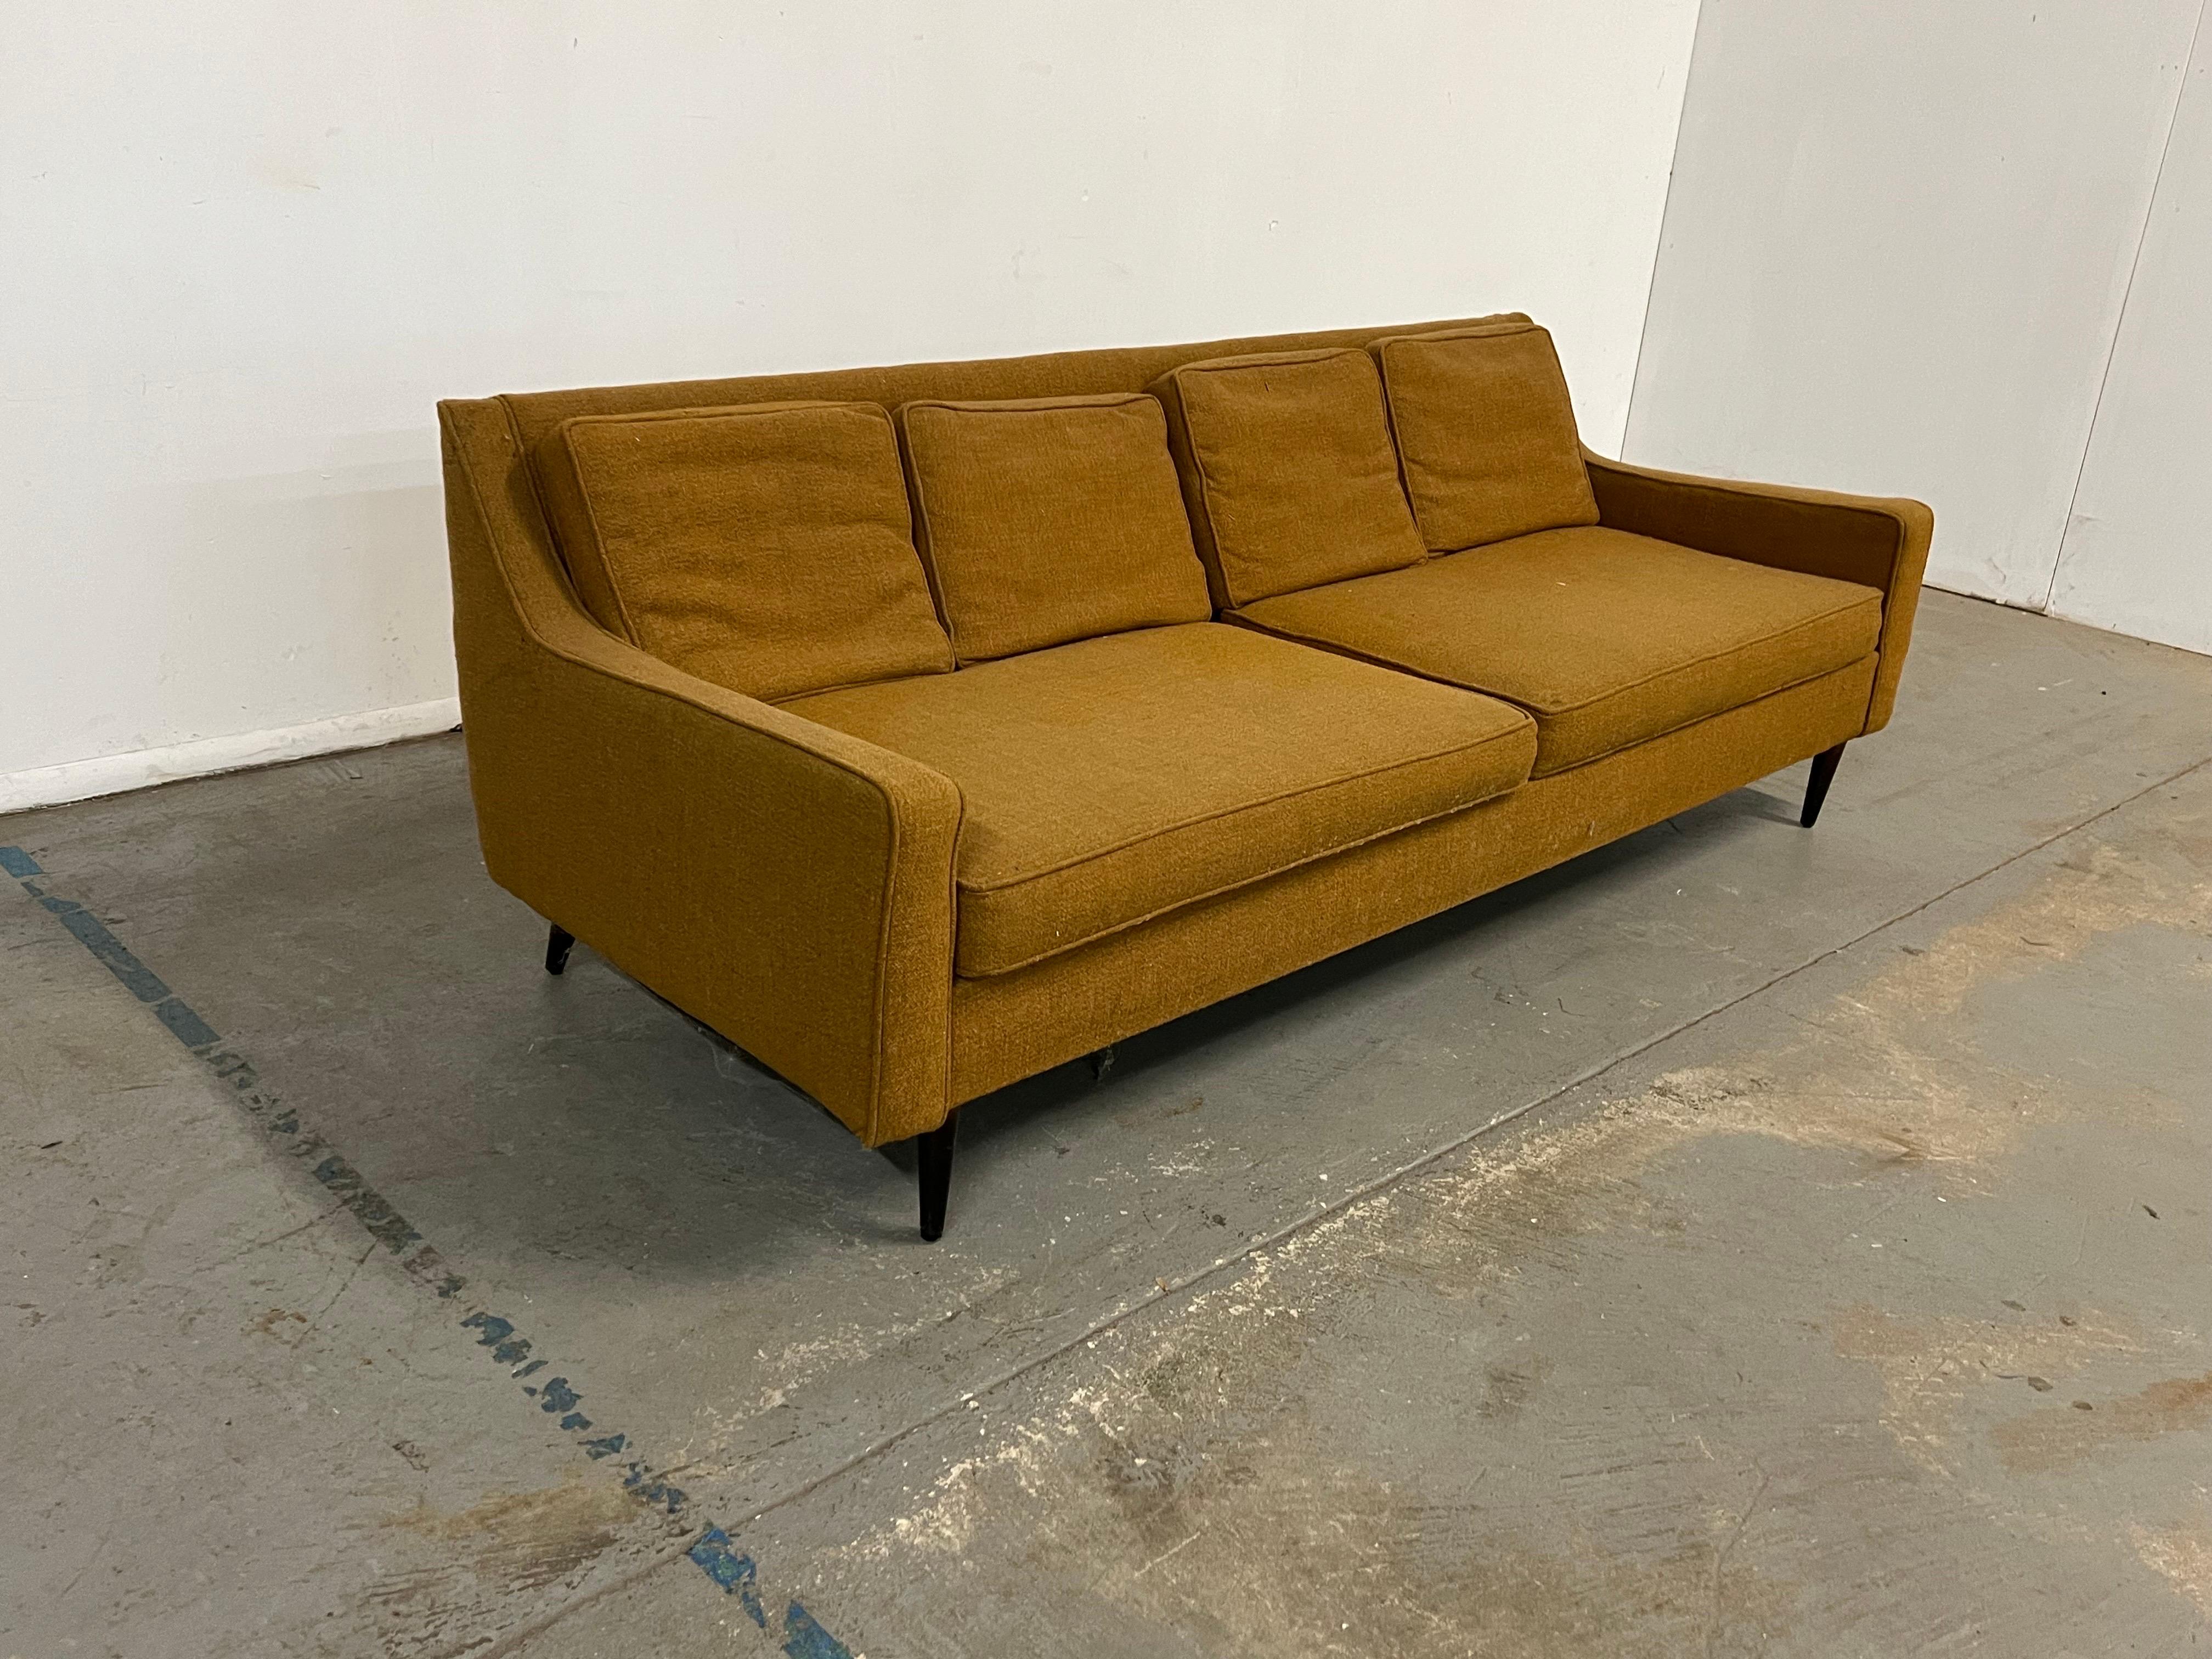 Mid-Century Modern Paul McCobb style sofa on pencil legs

Offered is an unrestored Mid-Century Modern sofa in the style of Paul McCobb. The sofa  has sharp and curved lines which make it  unique. The pencil legs elevate and give the floating